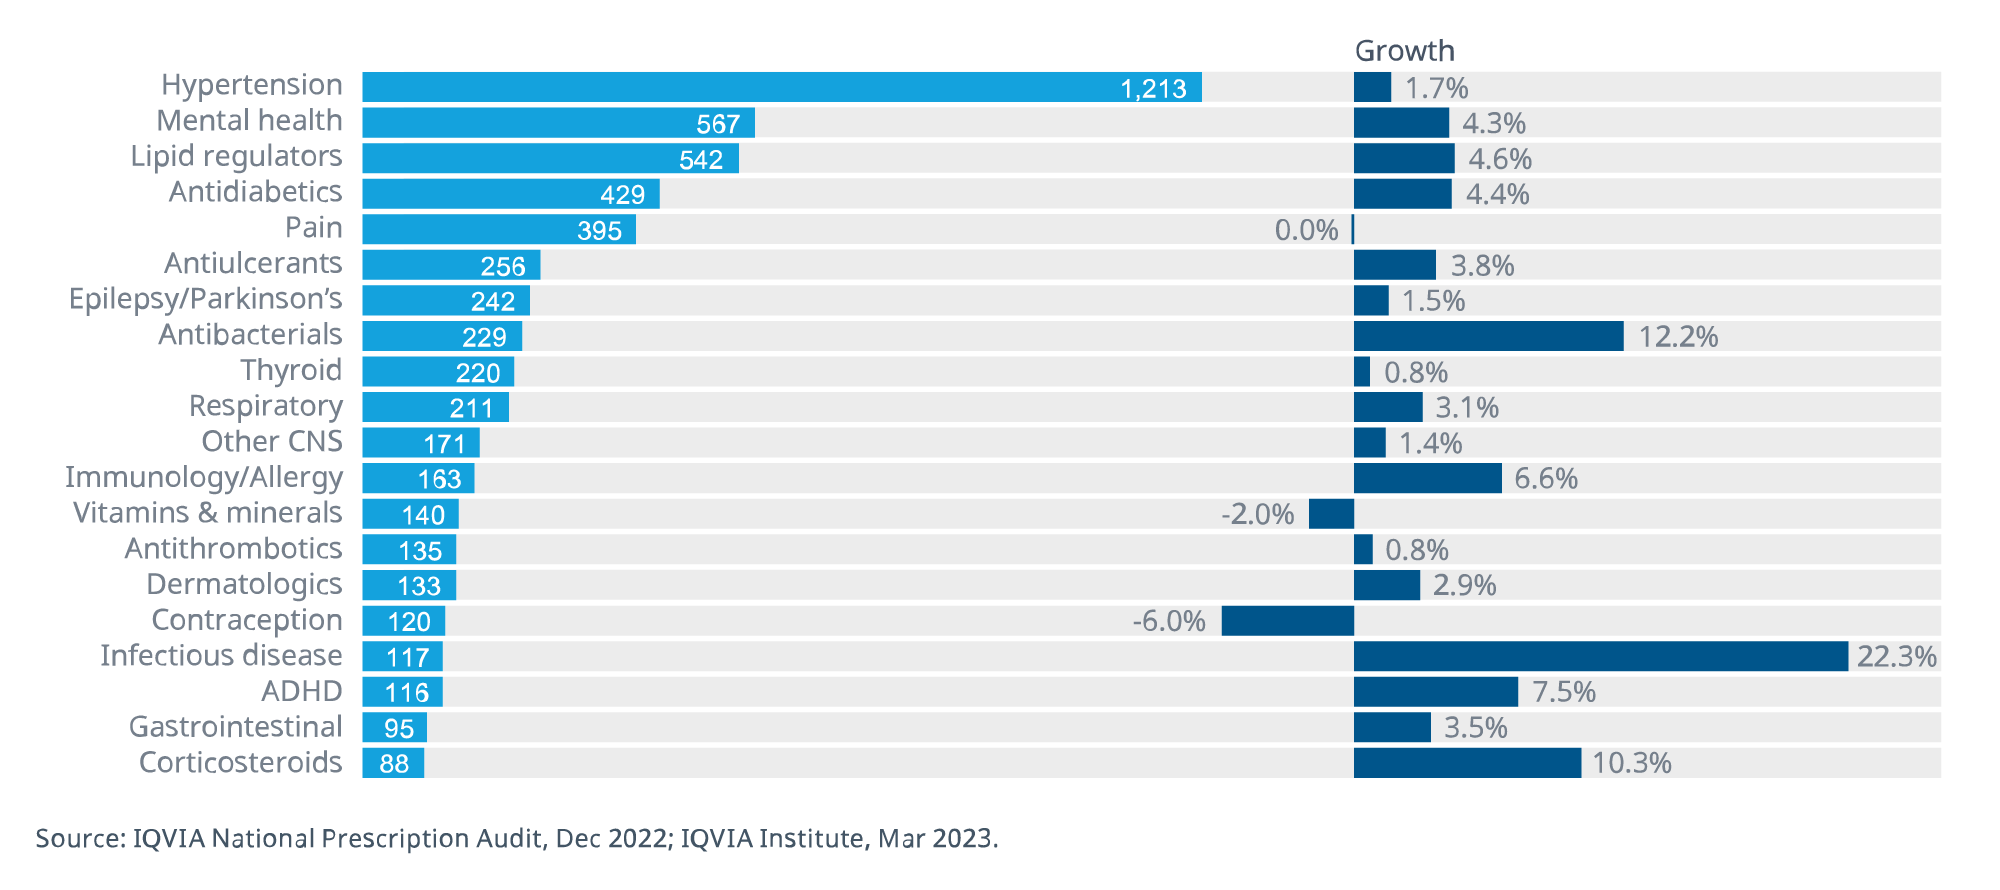 Figure 1. Adjusted dispensed prescriptions in 2022 (Mn) and percent growth from 2021. Image courtesy of IQVIA.